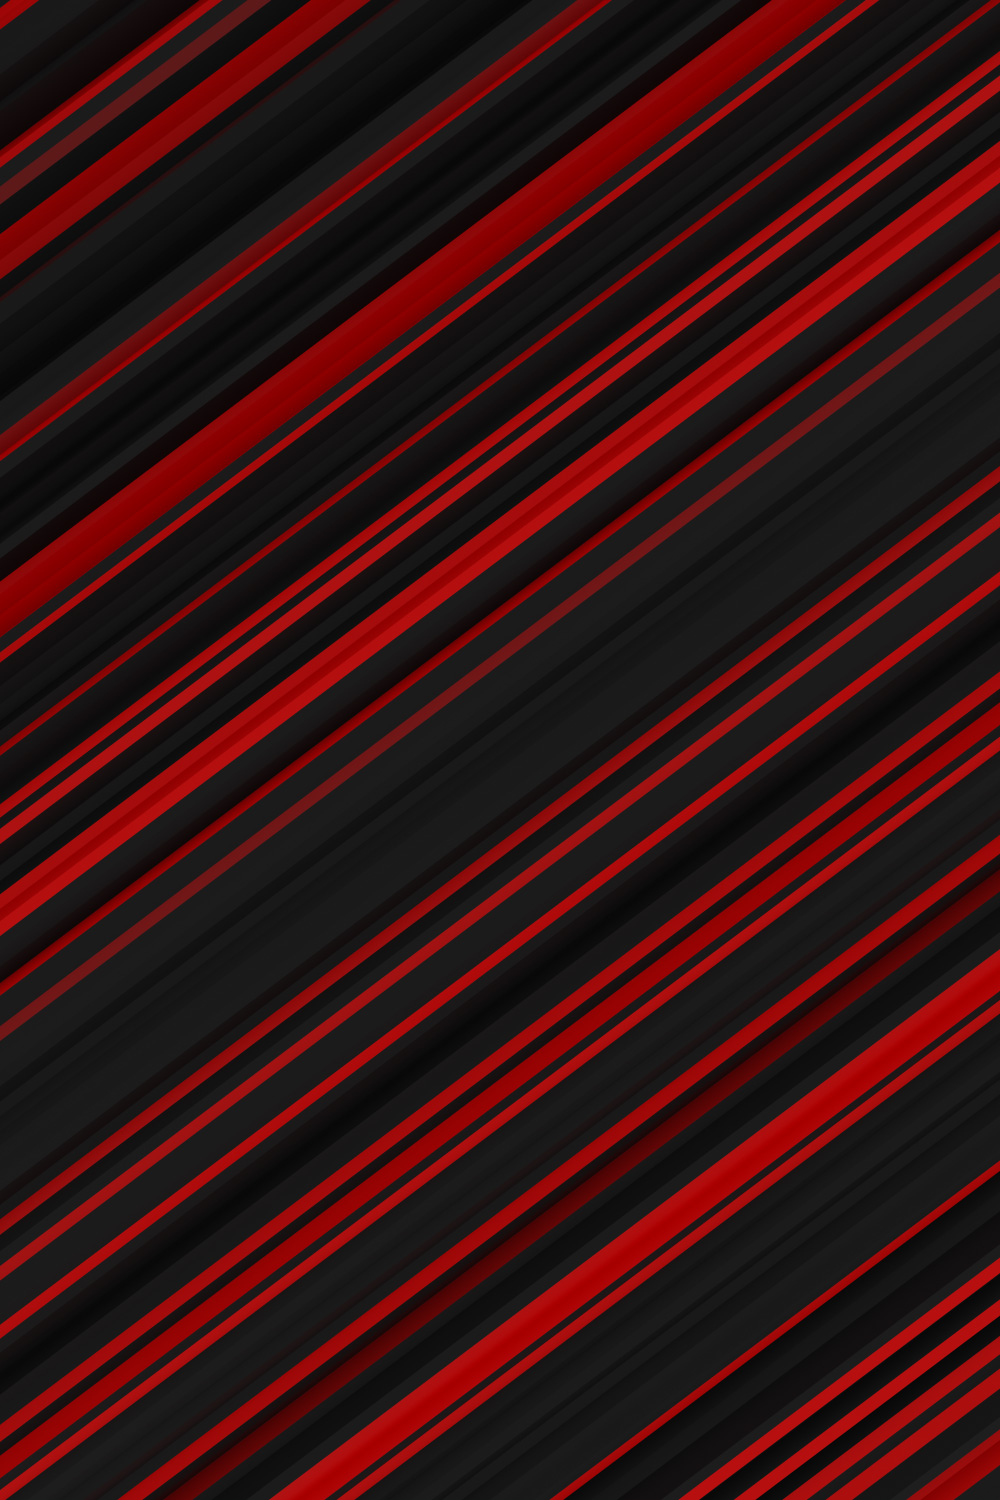 Abstract Striped Backgrounds Red Black pinterest preview image.